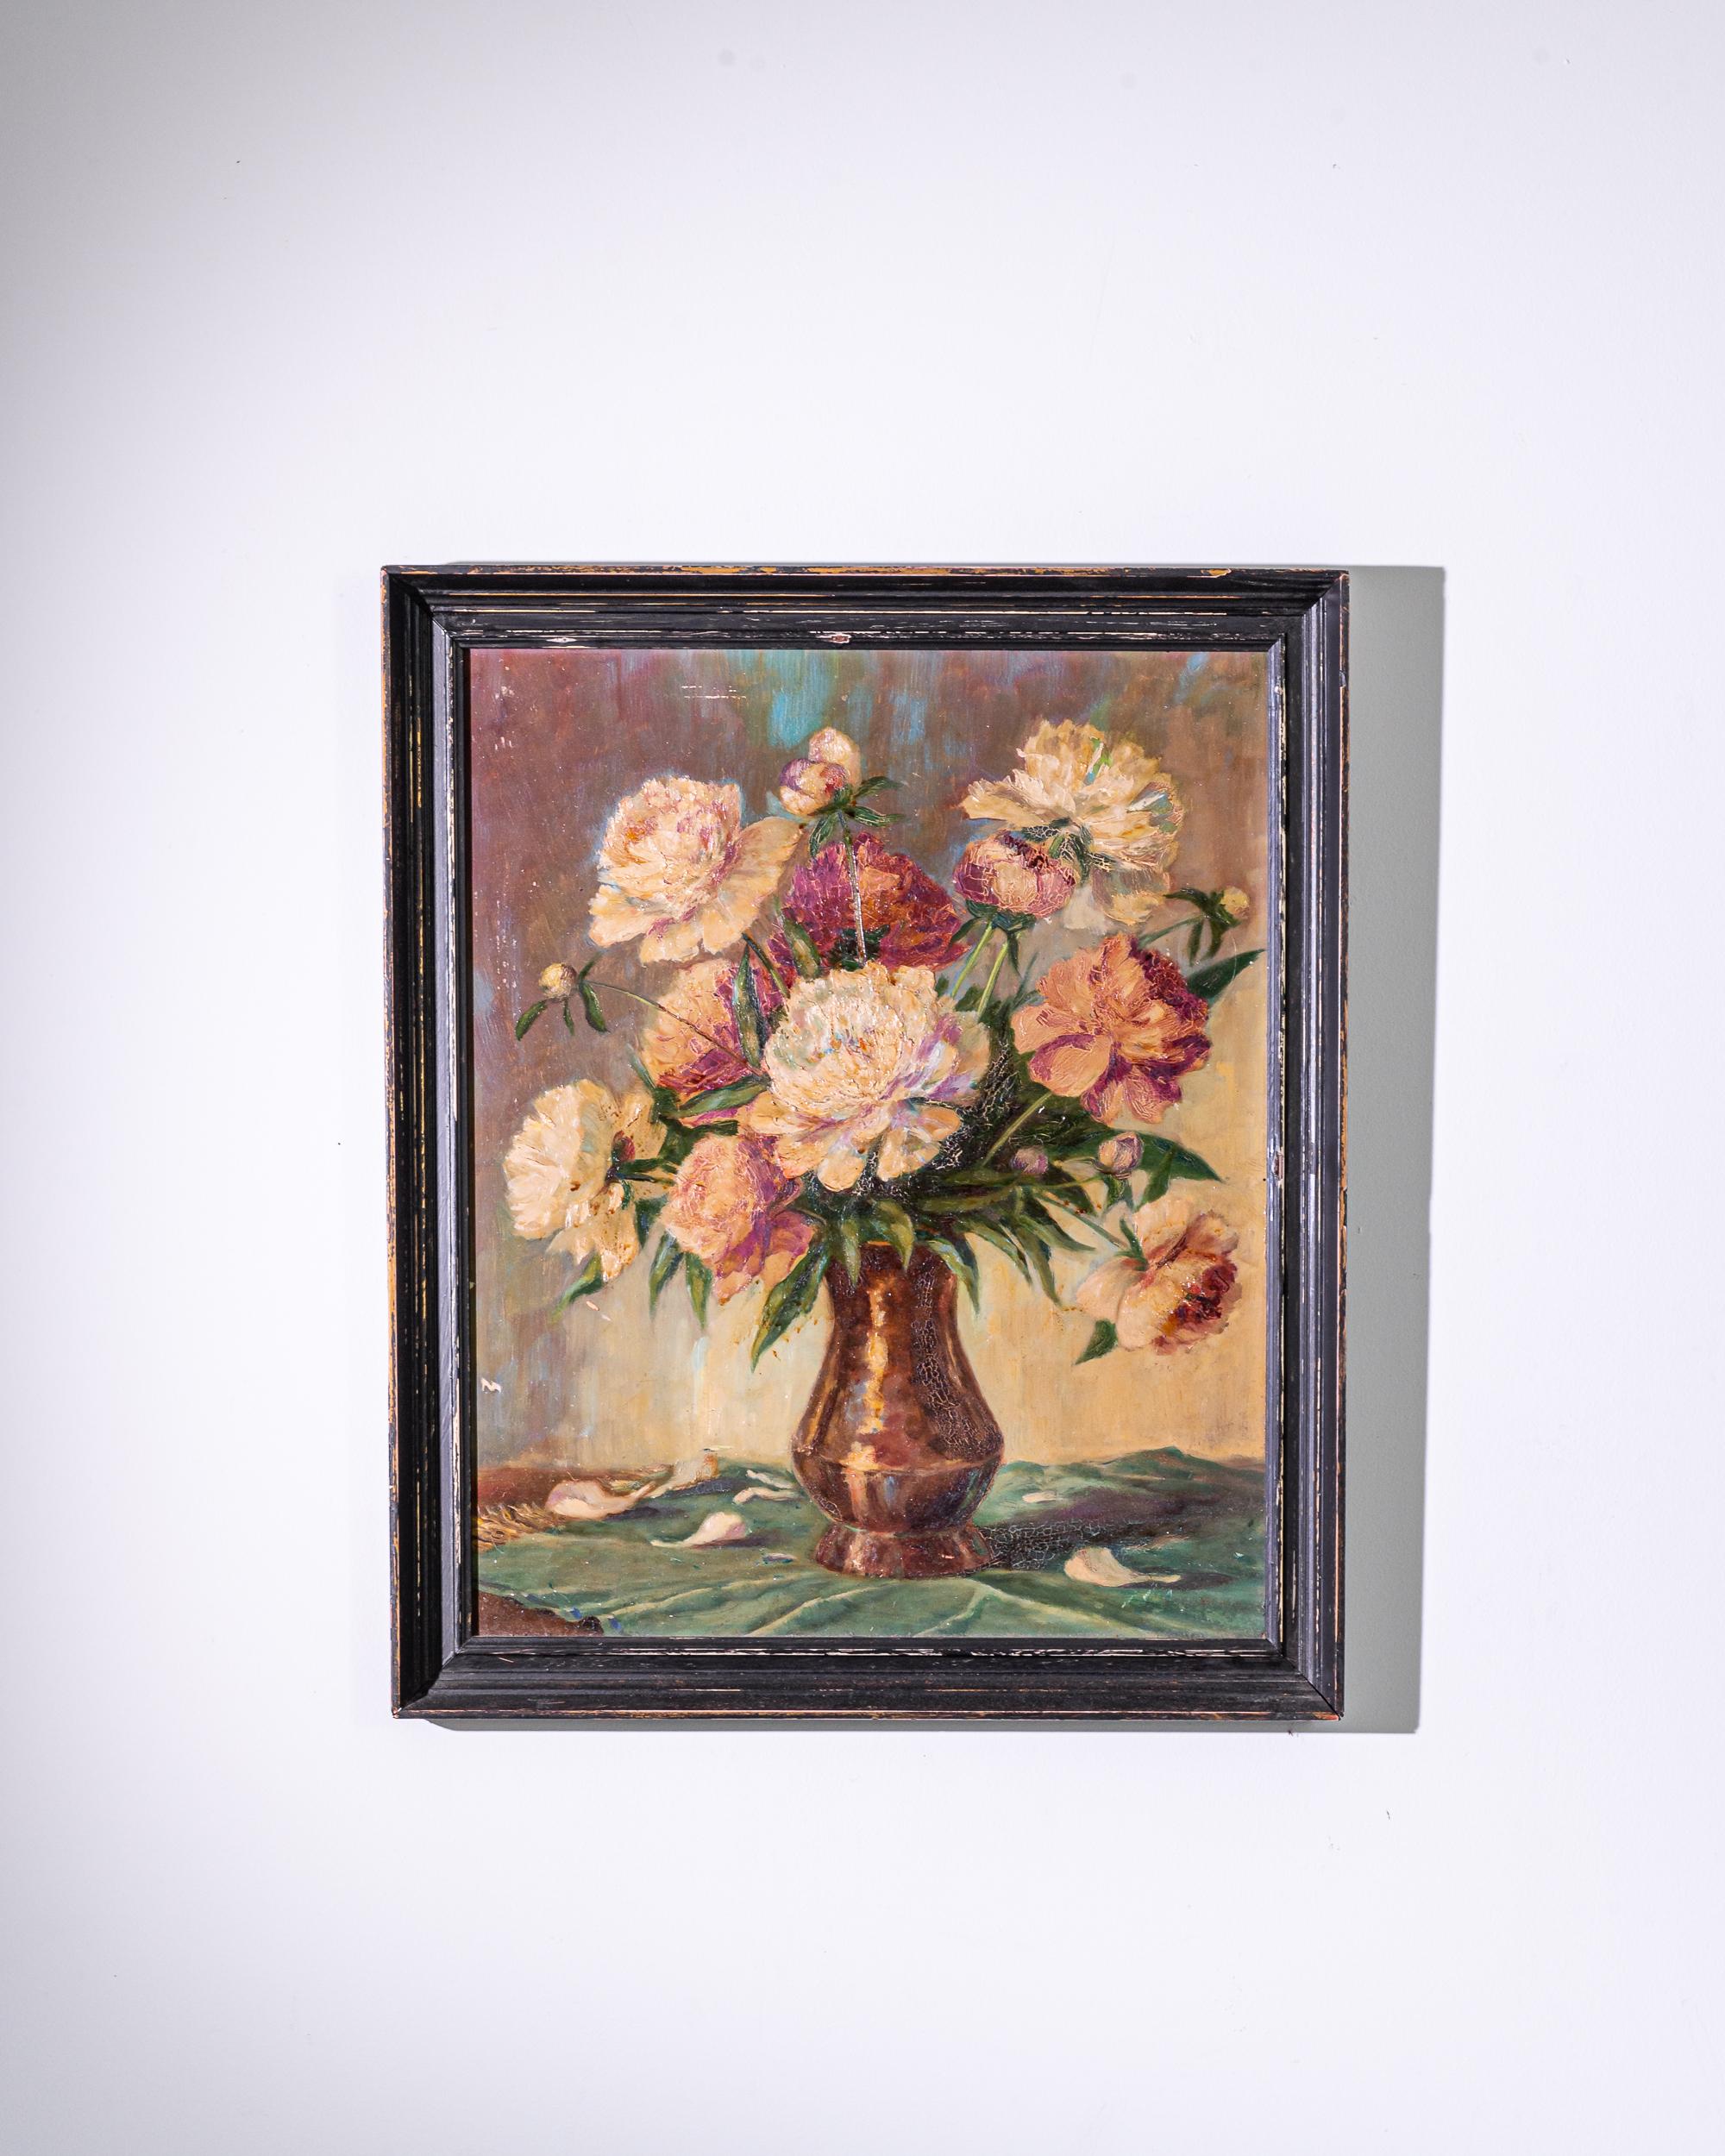 A vintage painting in a wooden frame, depicting flowers in a copper vase. Painted in 20th Century Czechia, the genre is still life, but the composition is dynamic and full of motion. The flowers are blowsy, falling open under their own weight;